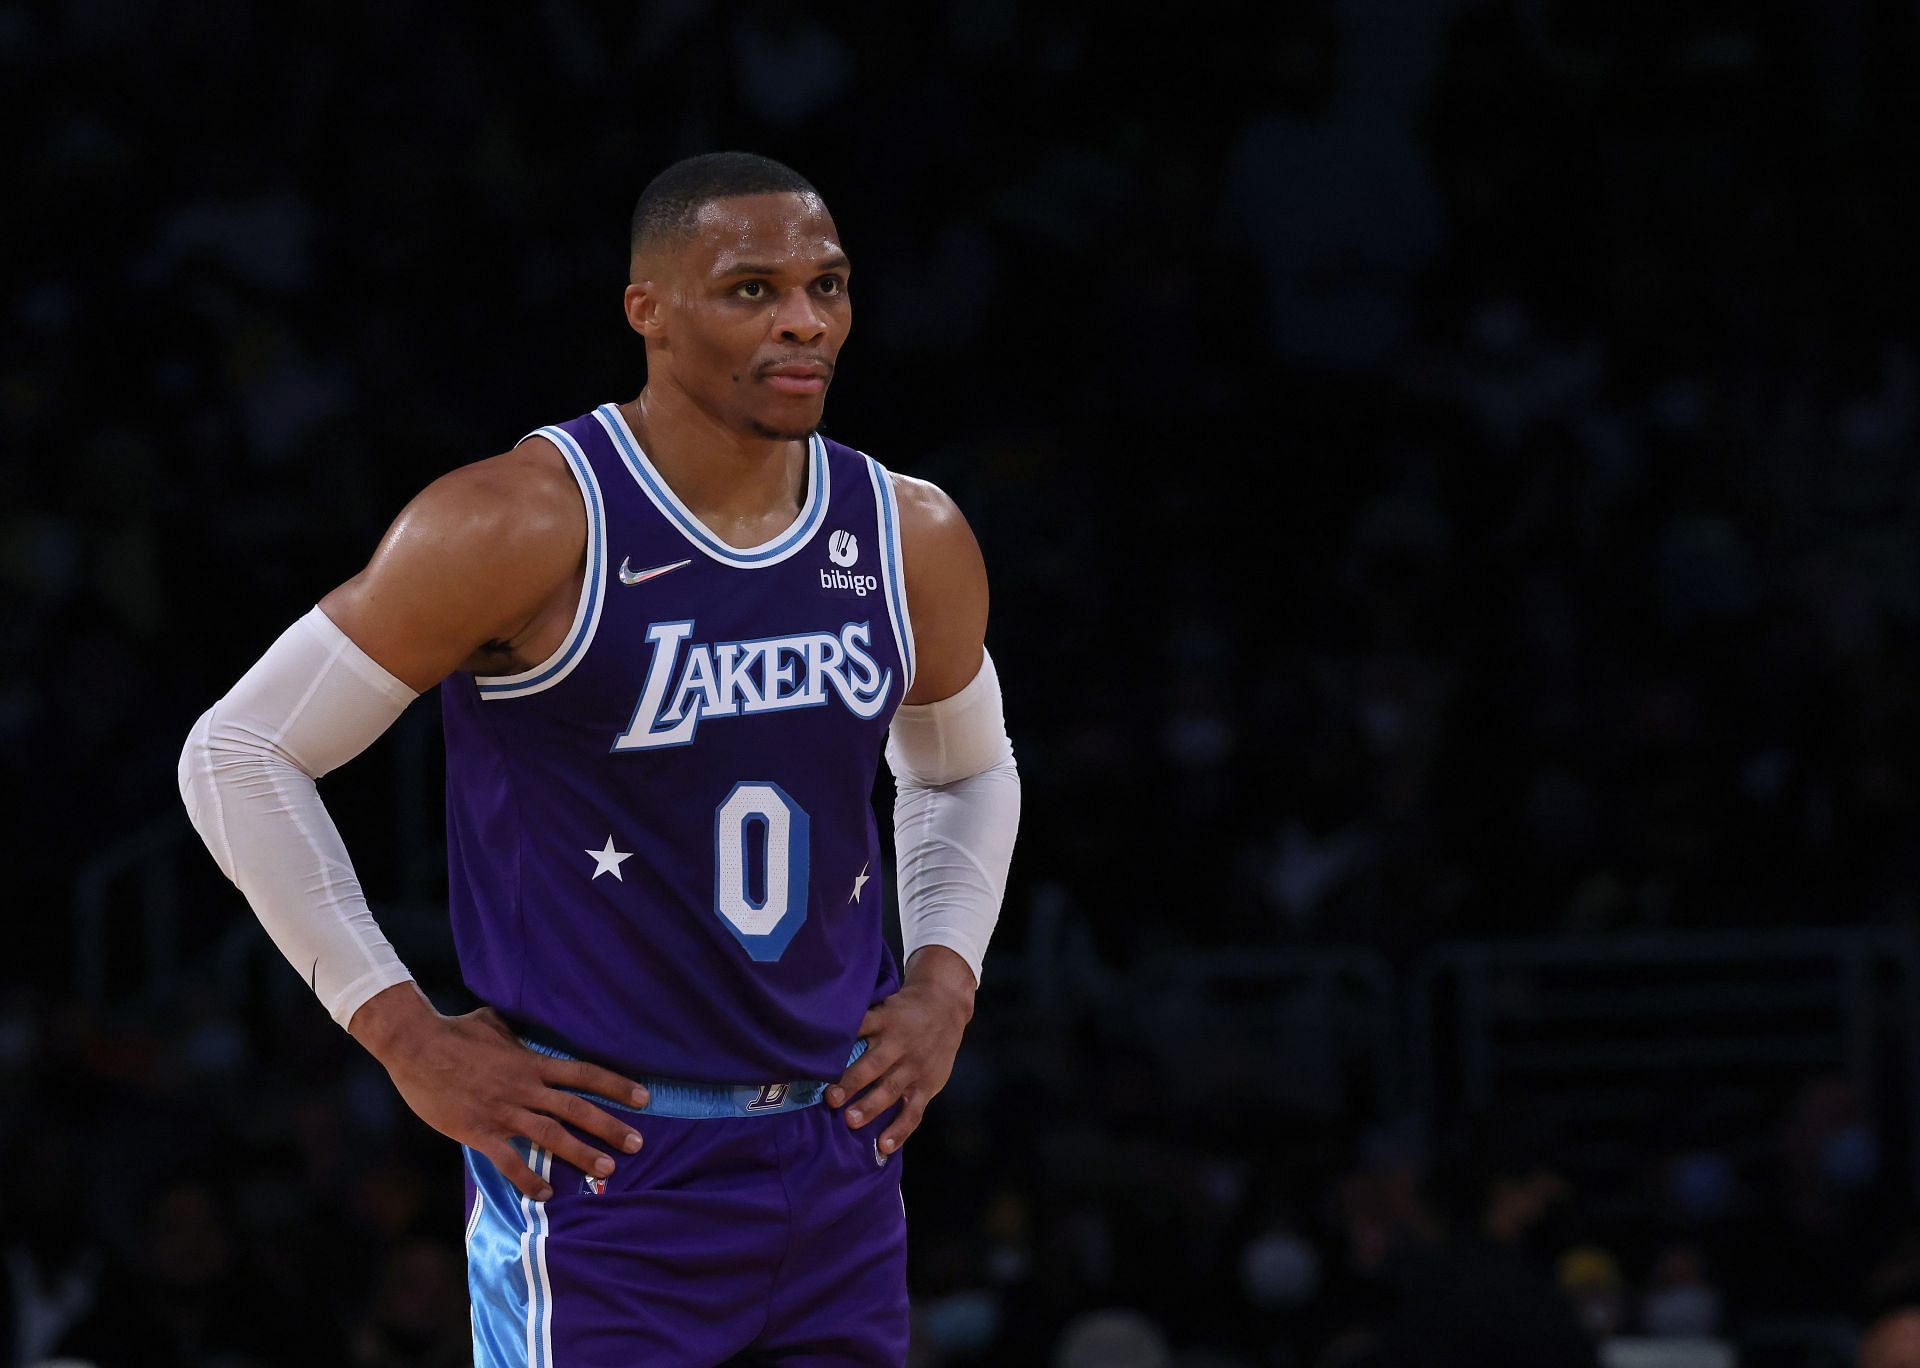 Los Angeles Lakers star guard Russell Westbrook has struggled to find his groove